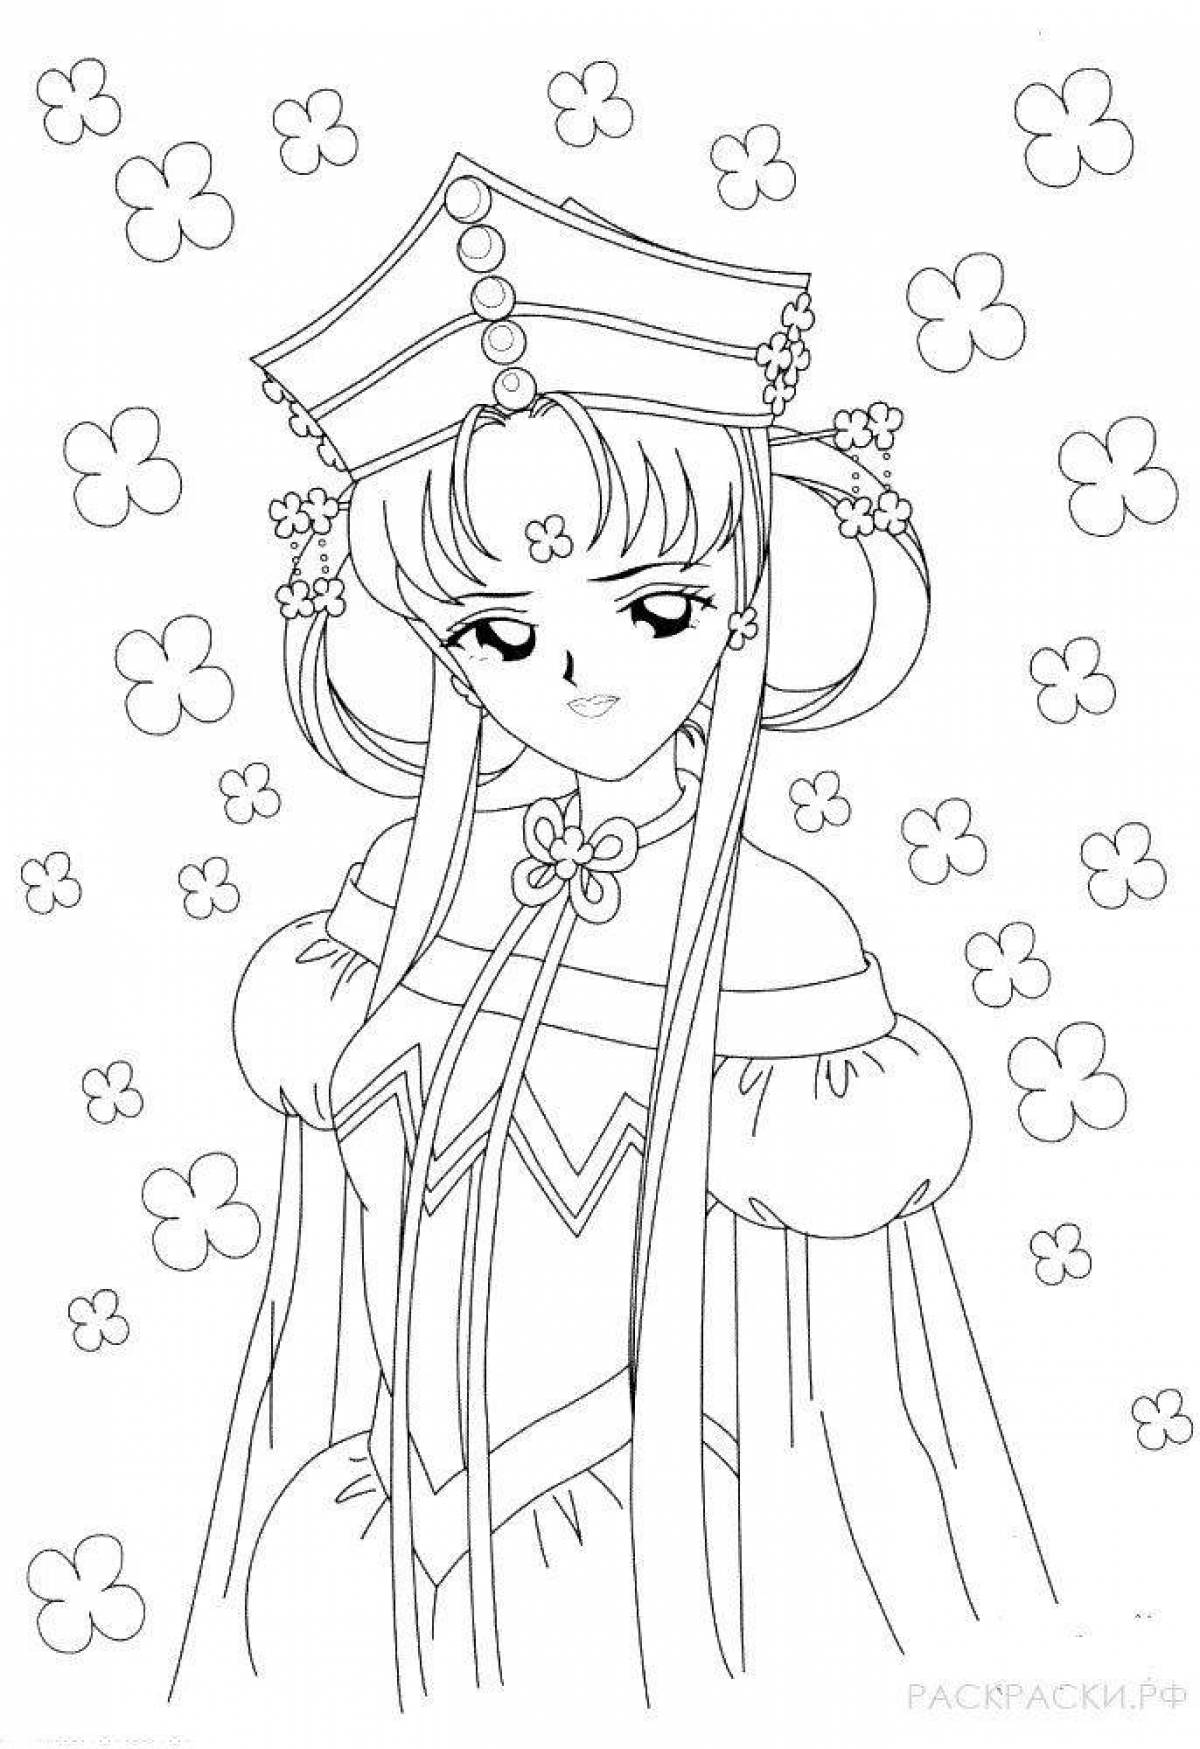 Playful new year anime coloring book